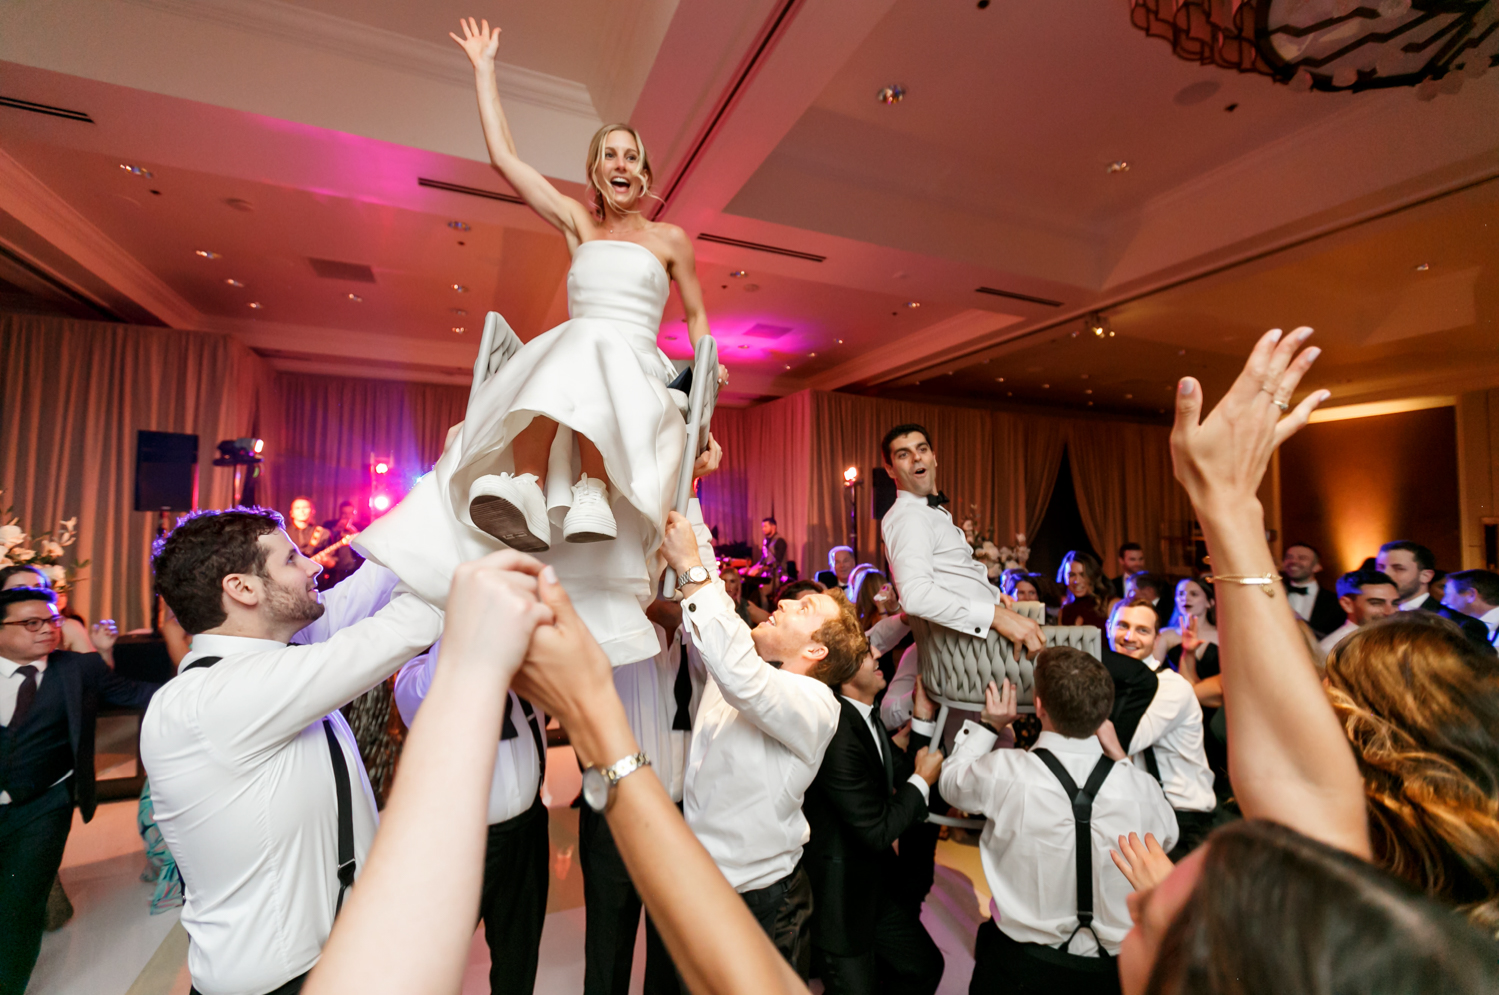 Guests dance the Horah and the bride and groom are lifted into the air on chairs